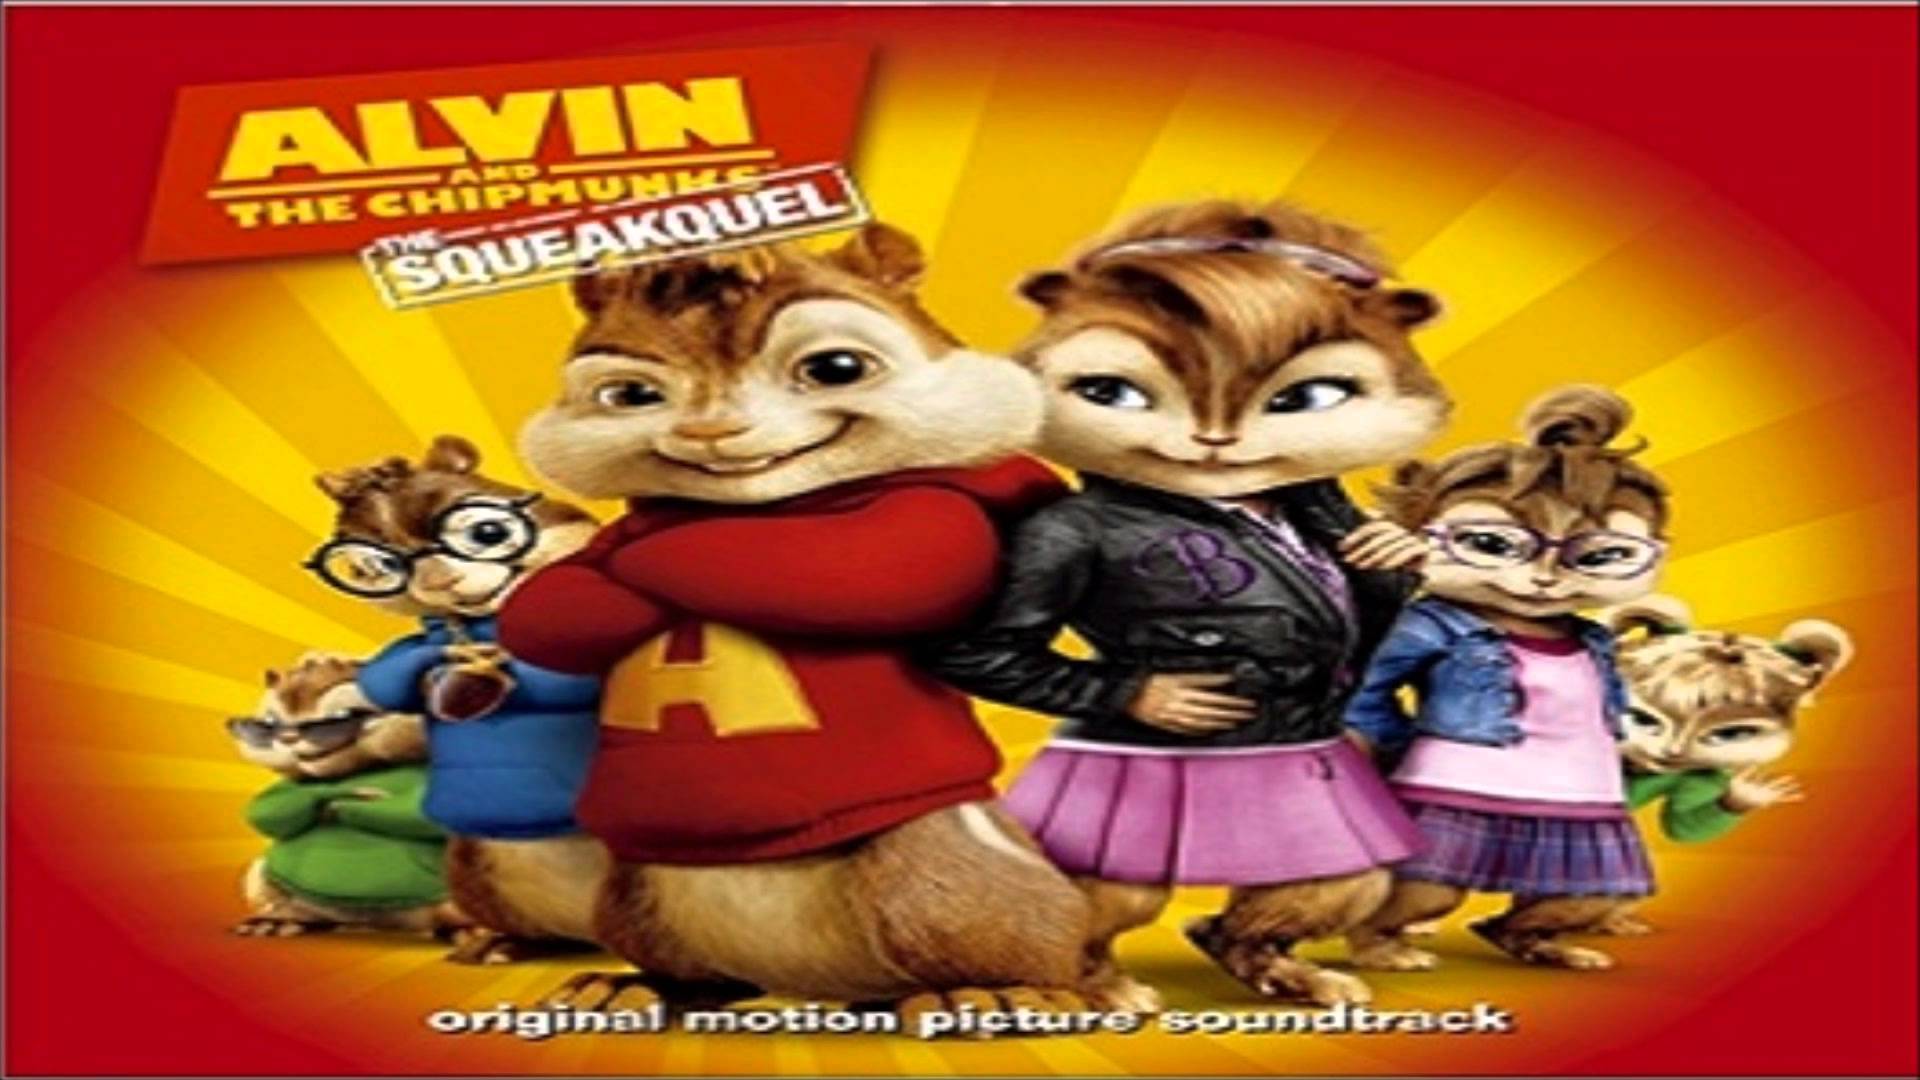 HD Quality Wallpaper | Collection: Movie, 1920x1080 Alvin And The Chipmunks: The Squeakquel